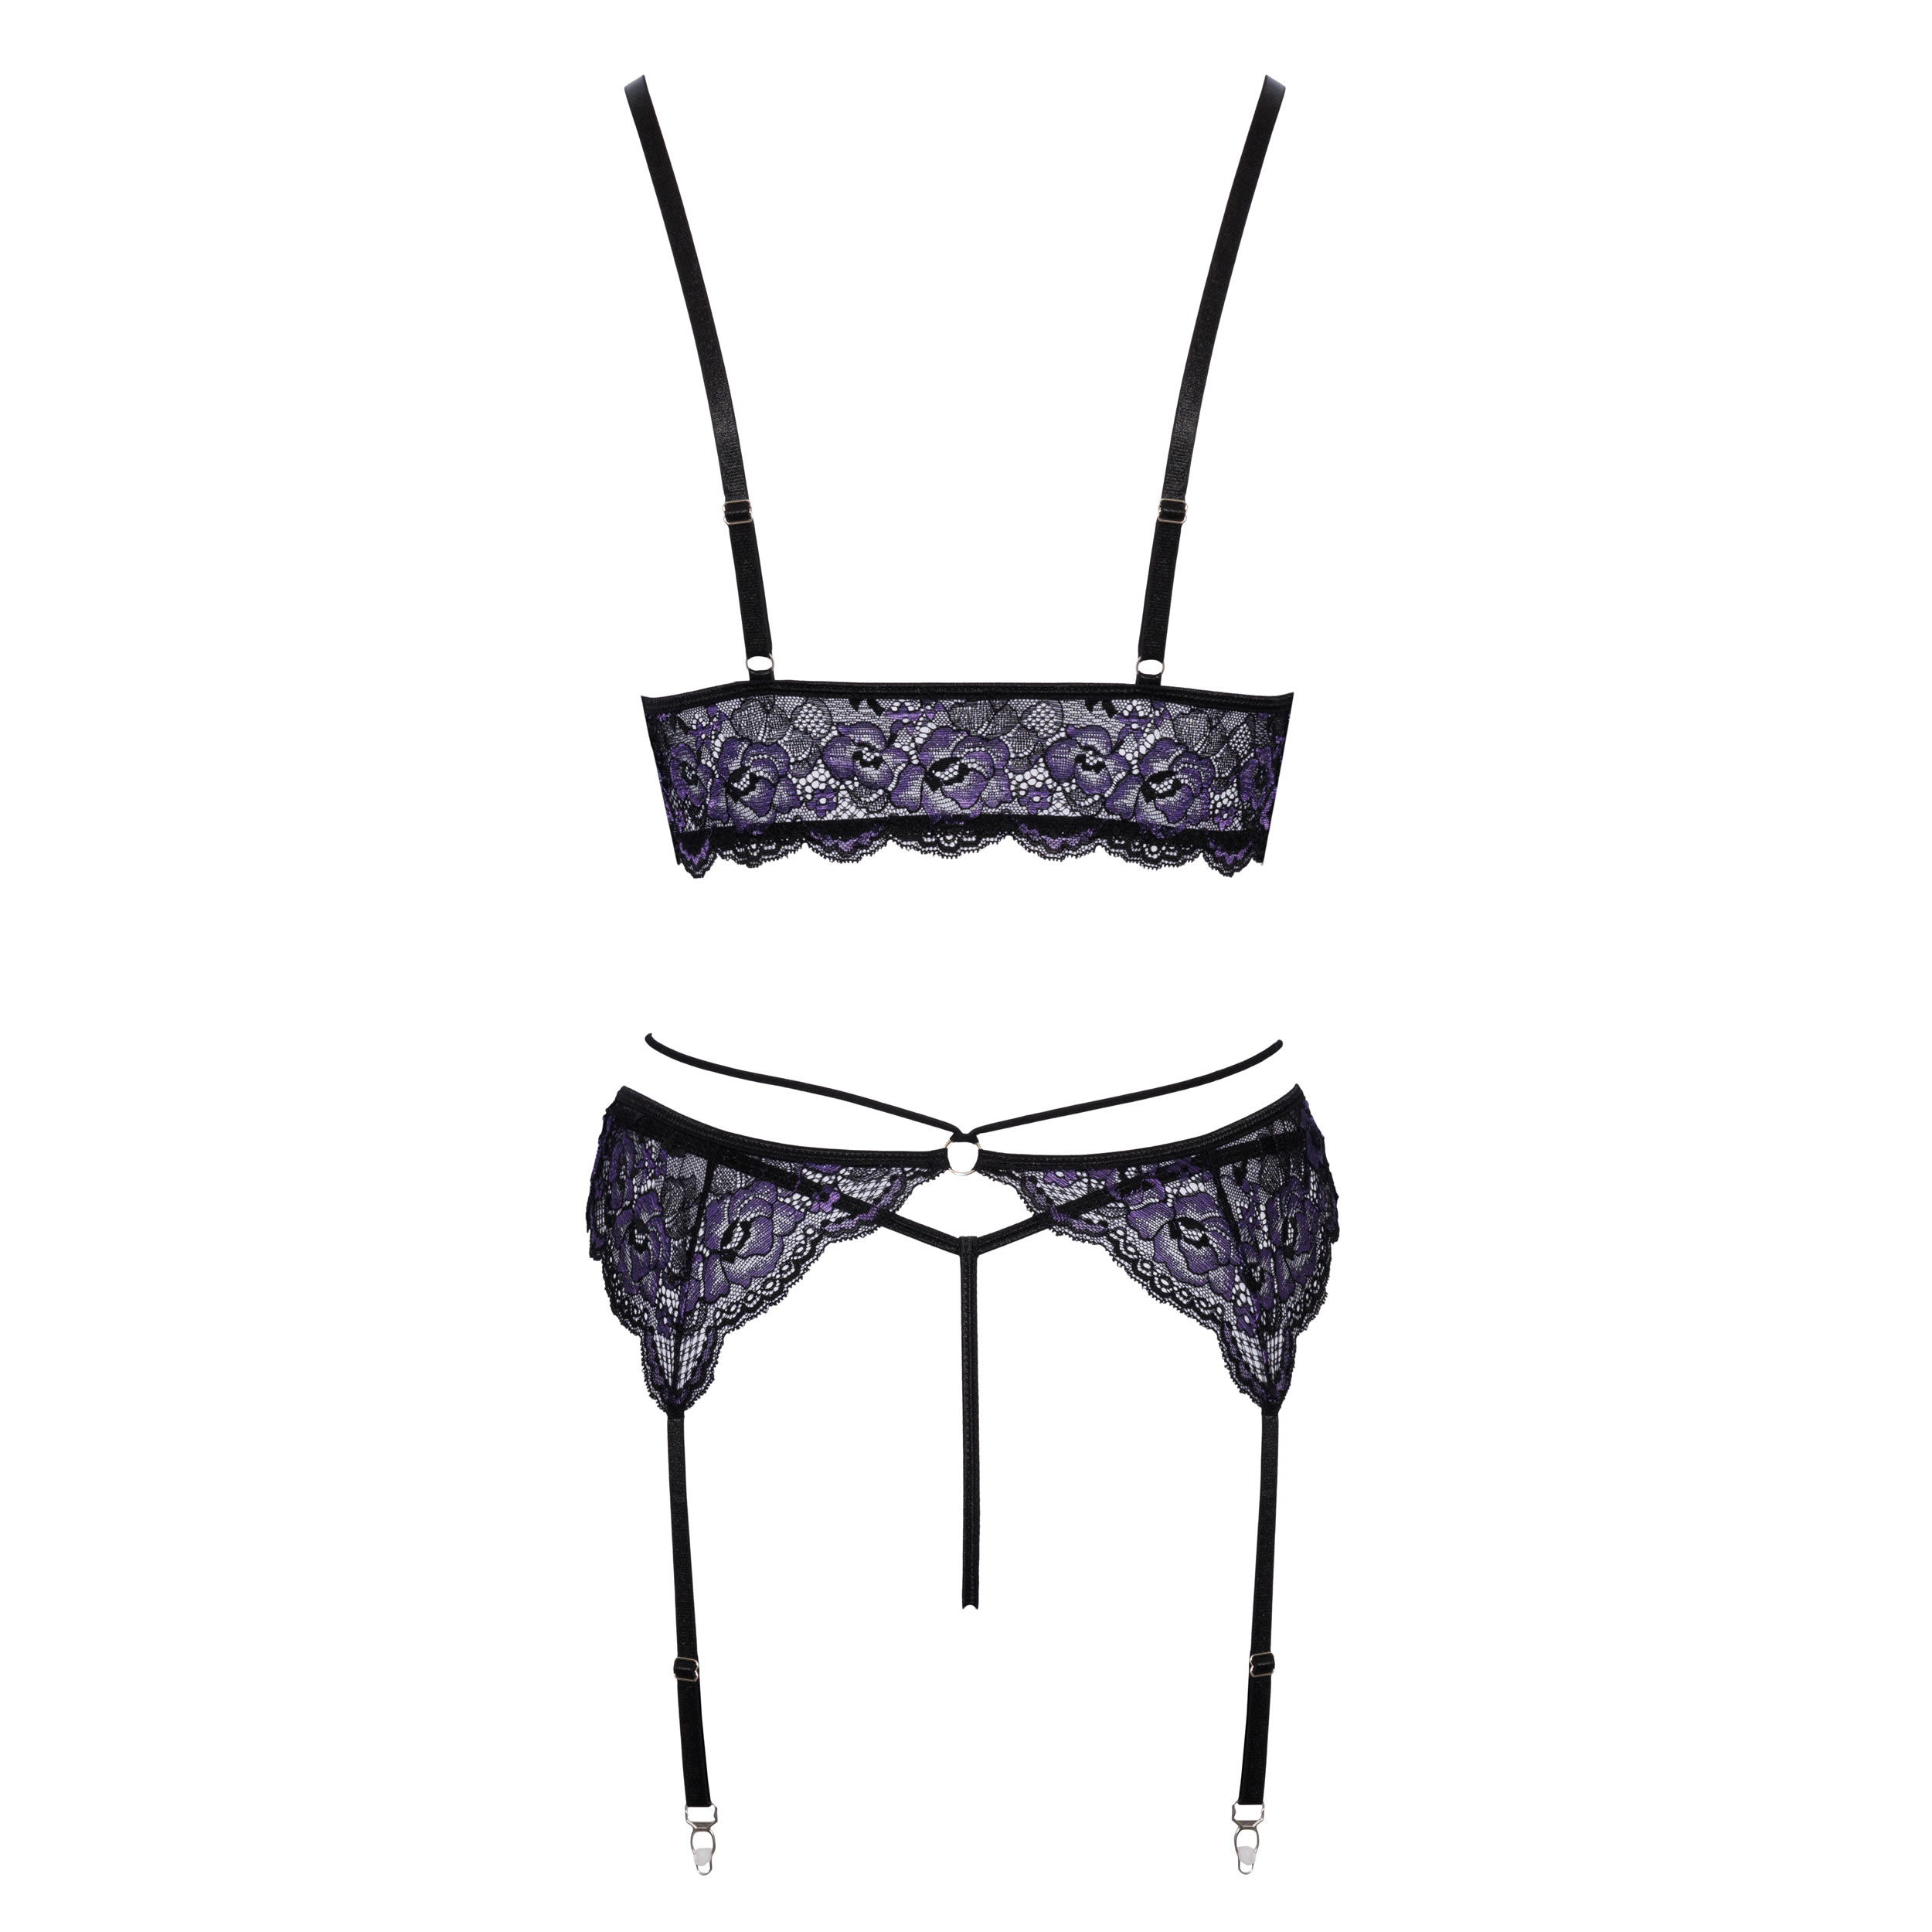 Lace Lingerie Set with Bralette and Suspenders